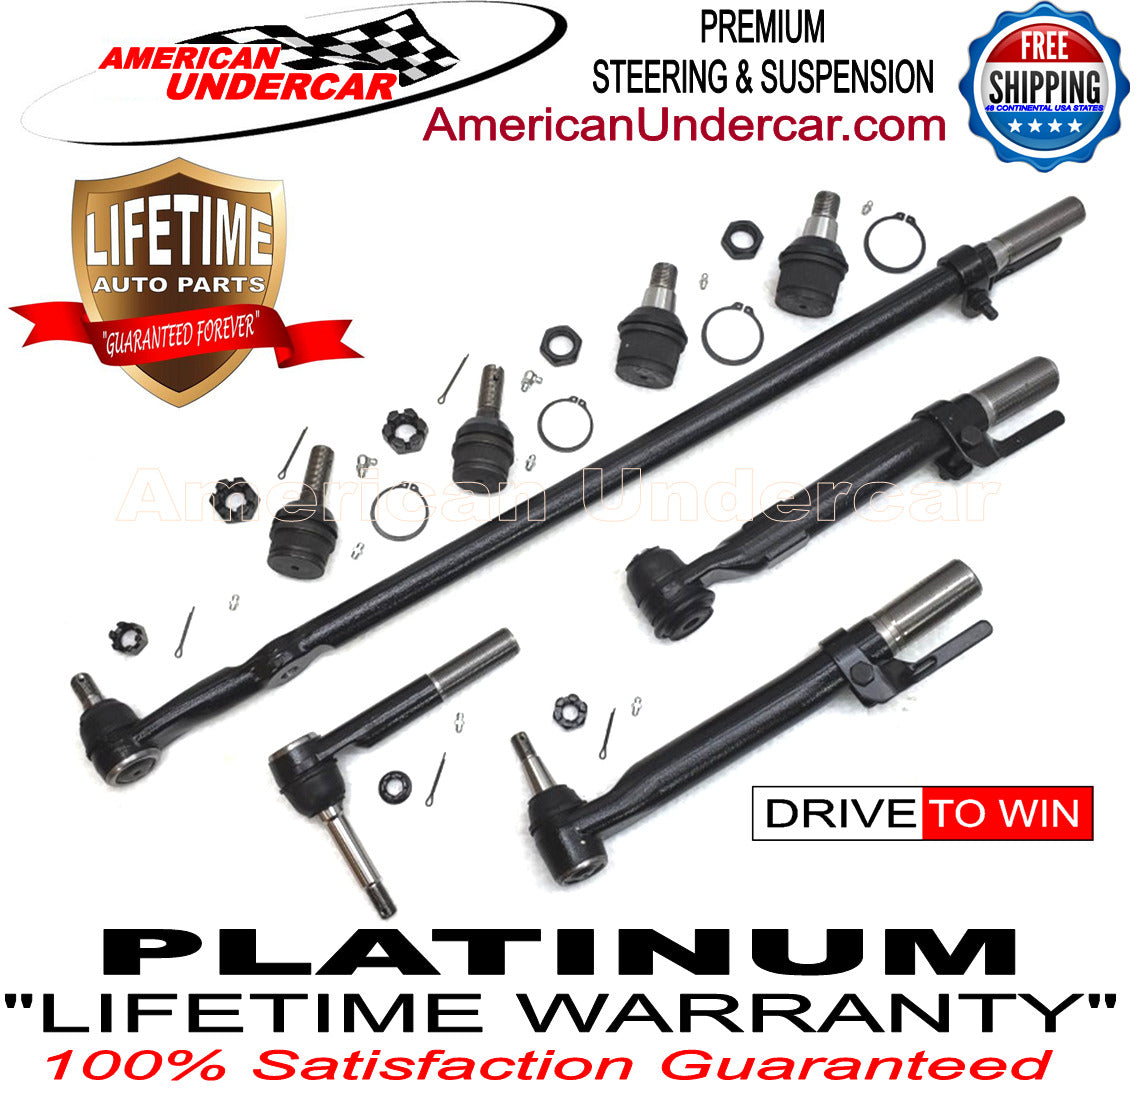 Lifetime Drag Link Ball Joint Tie Rod Sleeves Kit for 2008-2010 Ford F250, F350 Super Duty 4x4